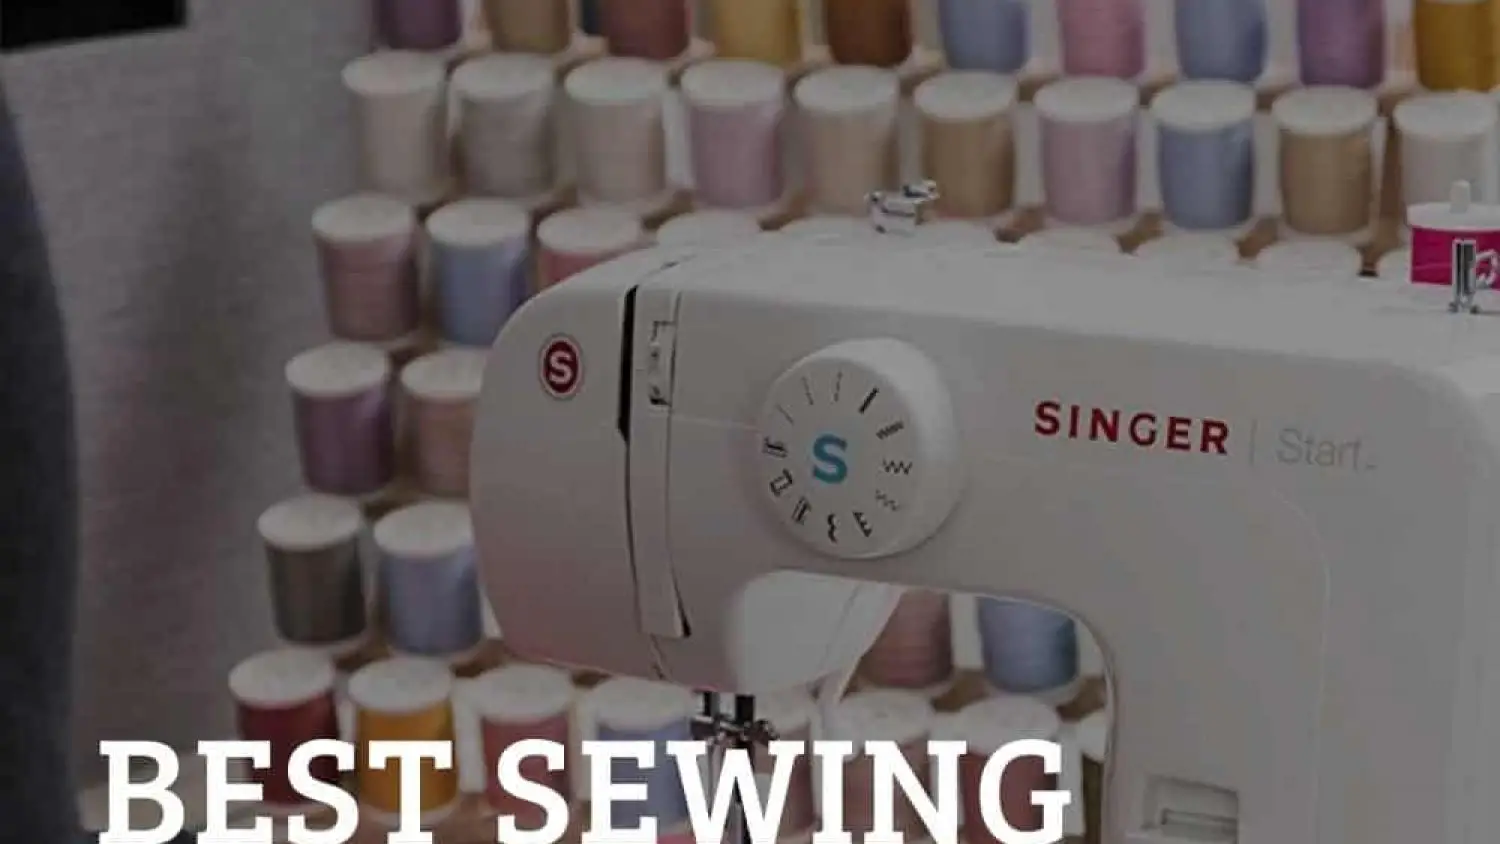 The Best Sewing Machines For Creative Designing And Sewing